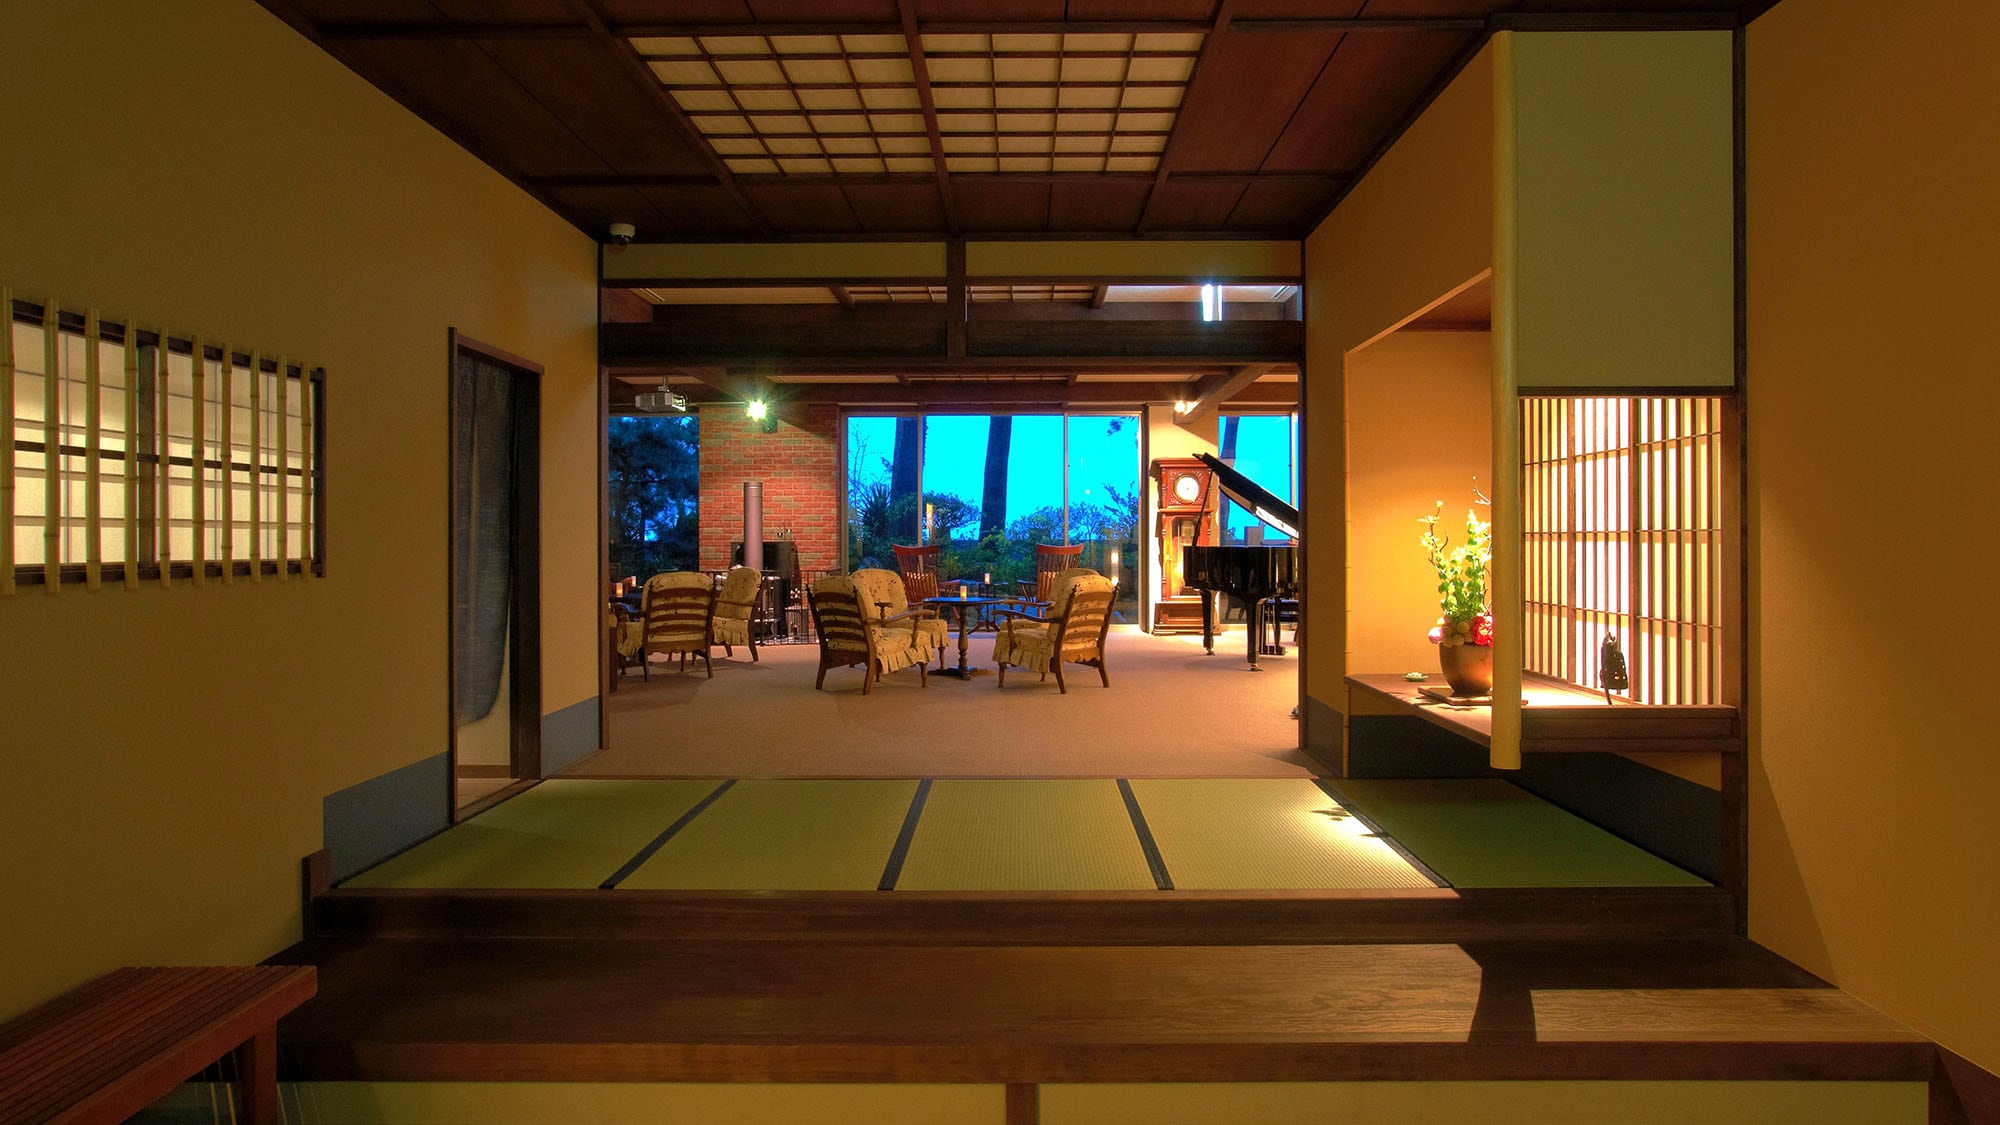 ・ Entrance: The lobby leading to the pure Japanese-style entrance has a Western-style interior.